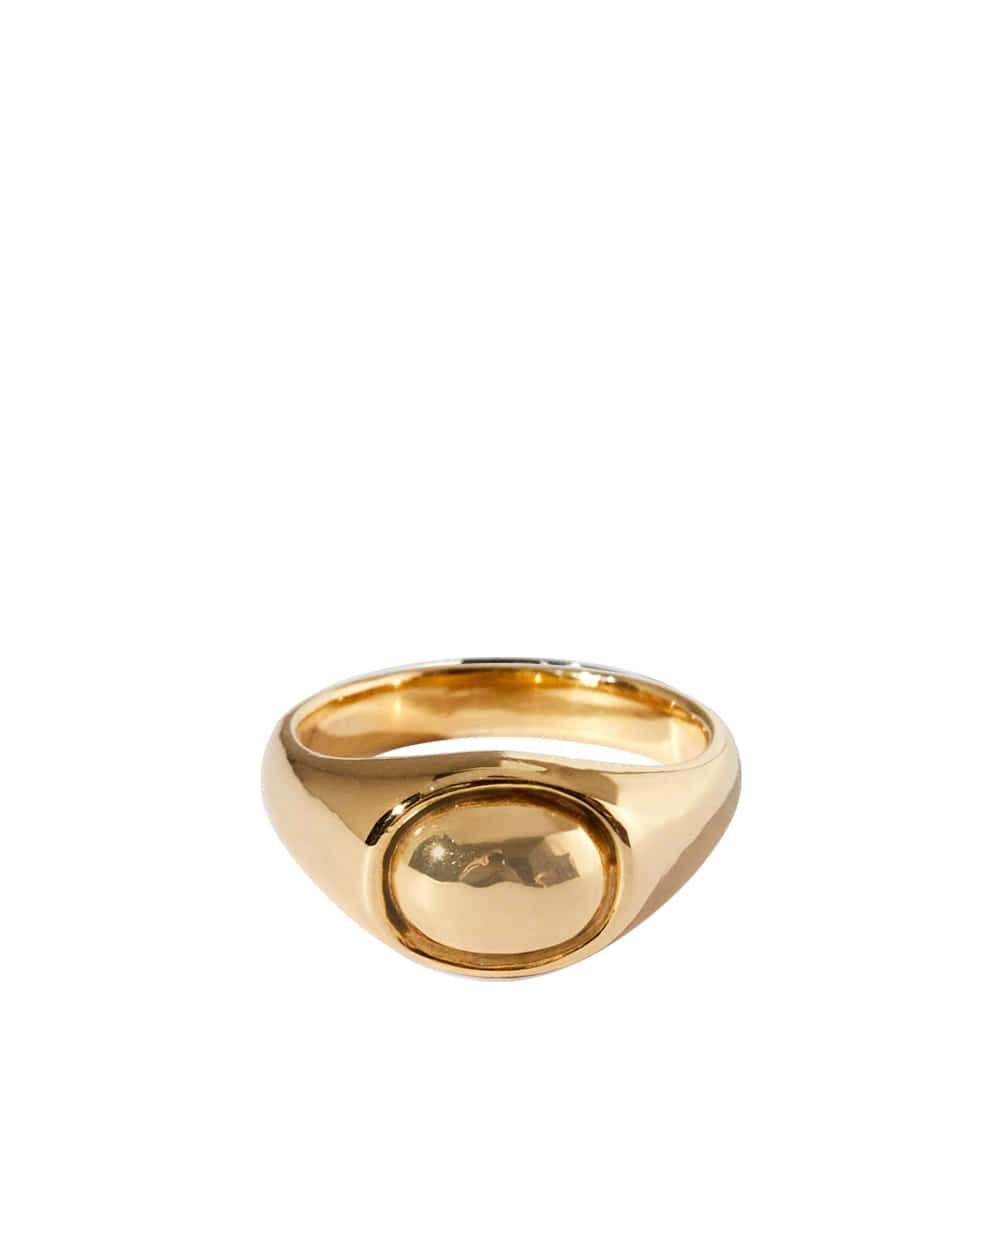 Noel silverstone ring_Gold / Gold